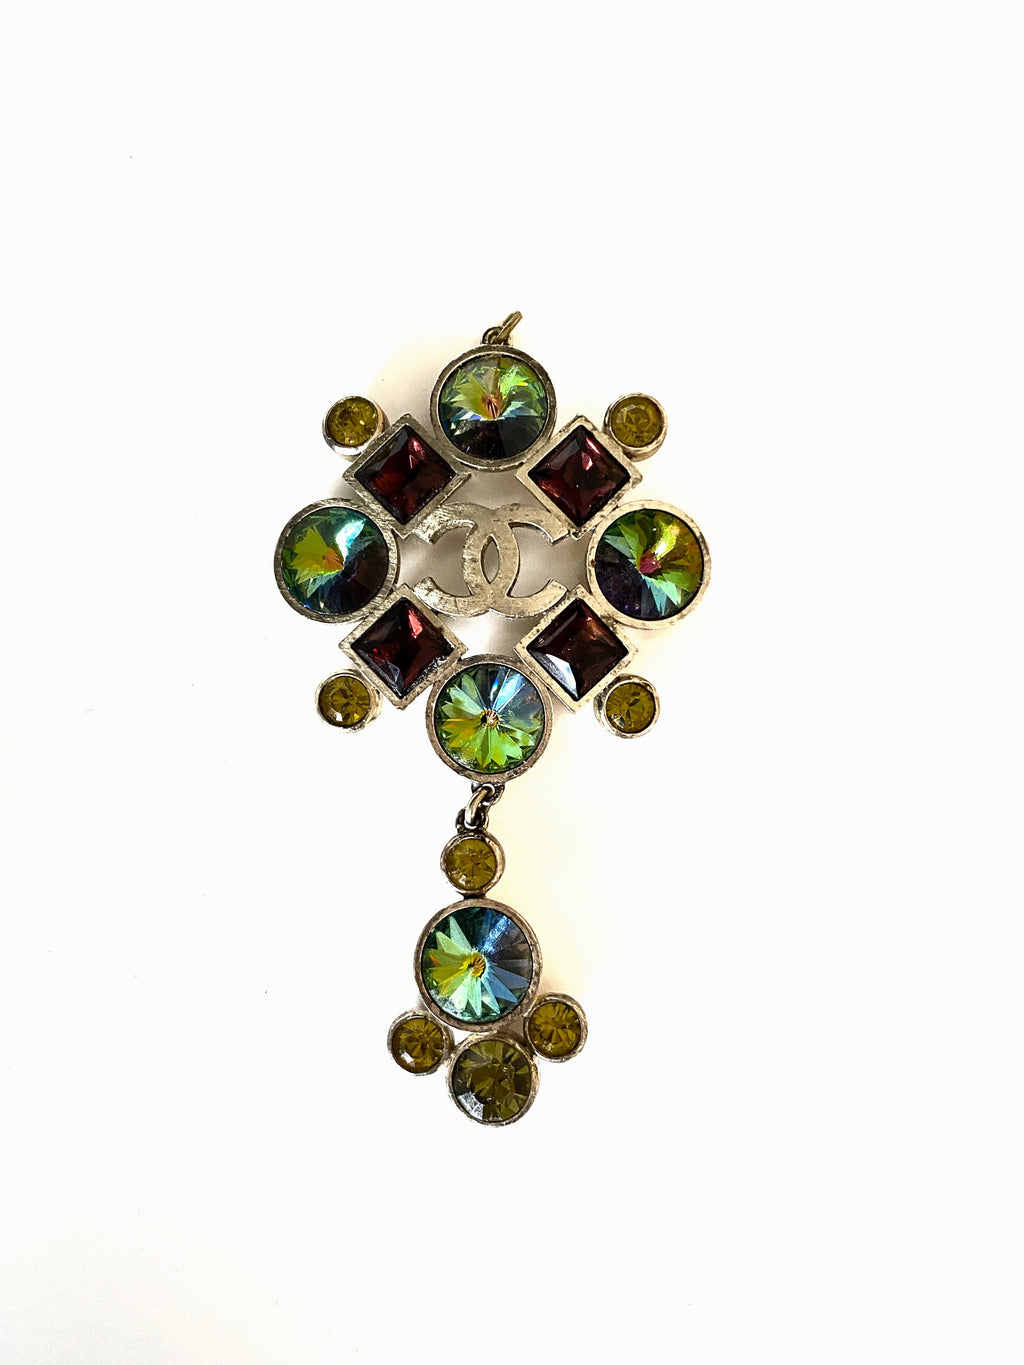 chanel pendant with CC logo, multi stones , red green and yellow stones, silver tone hardware